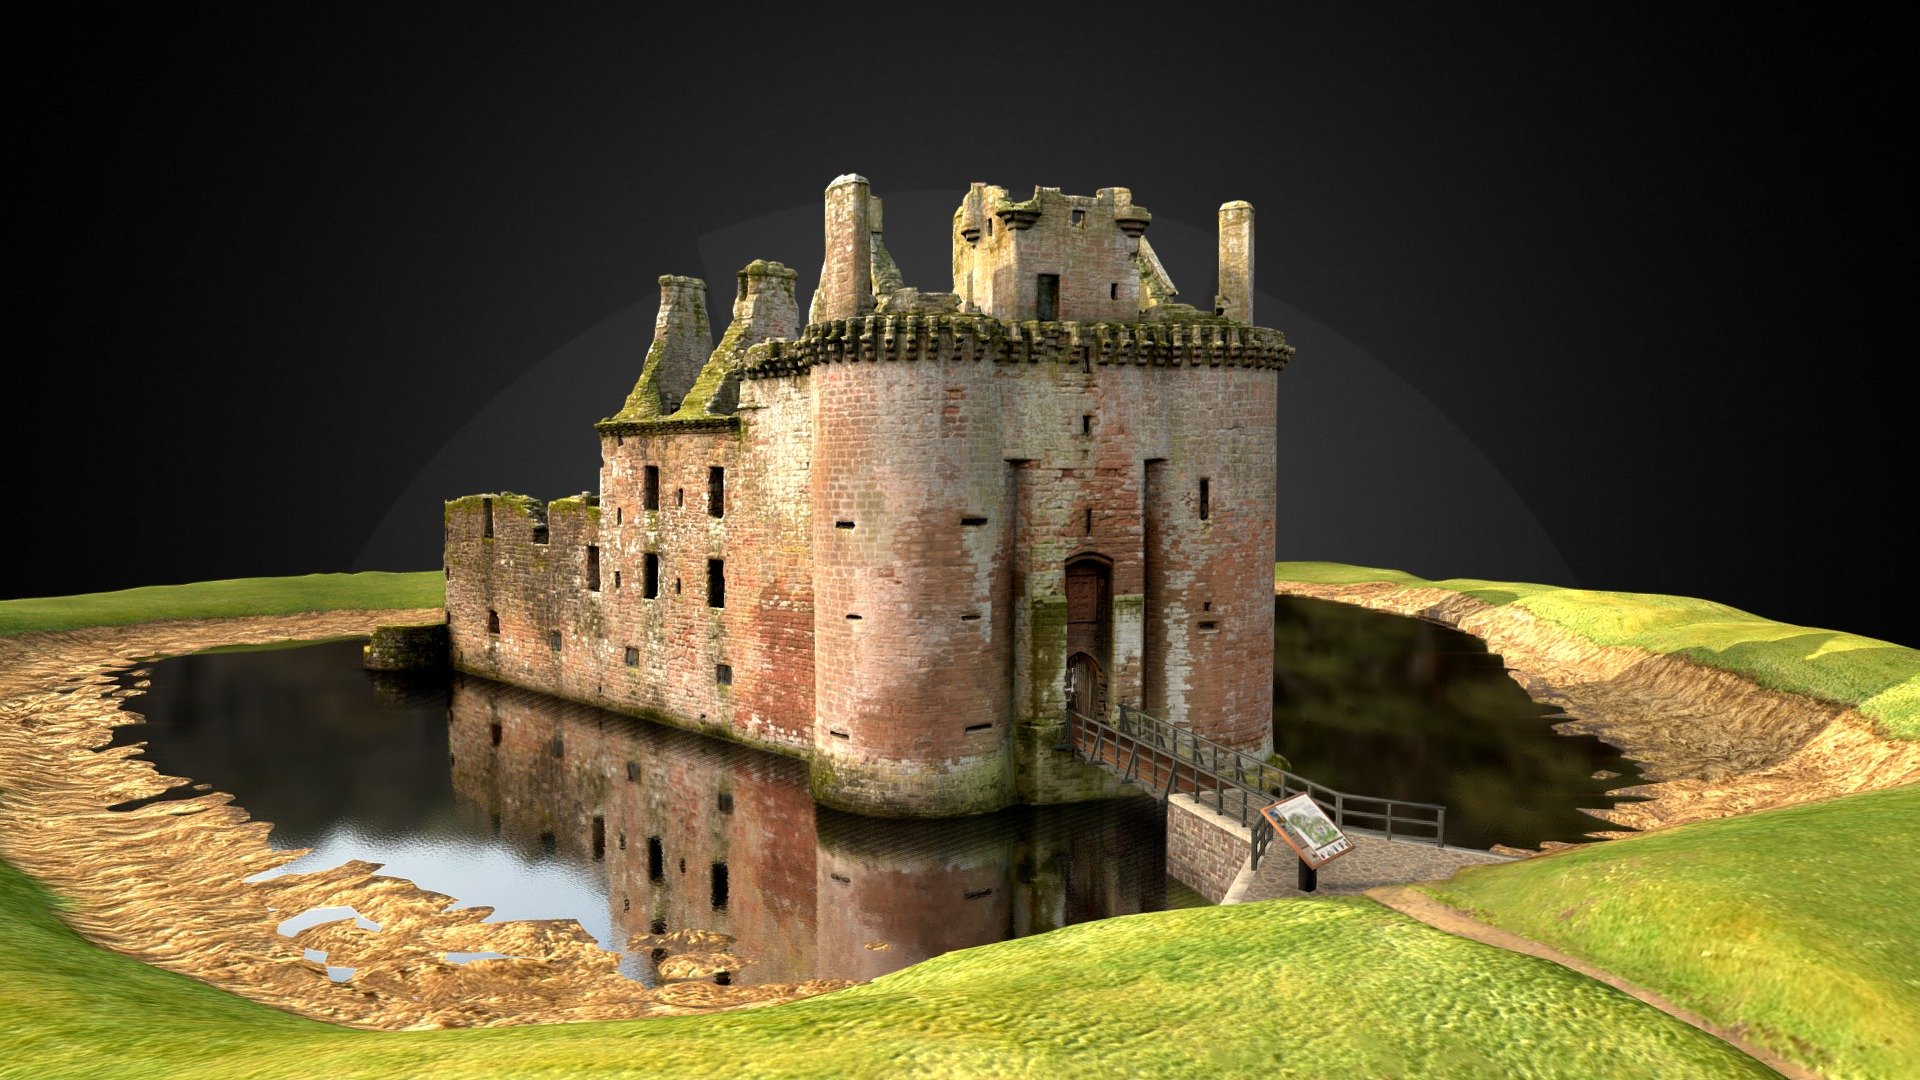 Caerlaverock Castle stands largely complete and is amongst the foremost examples of Scottish medieval secular architecture. Its triangular-shaped curtain wall is unique in Britain, and the Nithsdale Lodging within, dating from the 1630s, is one of the finest examples of Renaissance architecture in Scotland.
Caerlaverock Castle was the chief seat of the Maxwells, one of the great noble families in southern Scotland. 

The castle is famous in history and literature through its siege by Edward I of England in 1300, commemorated in the contemporary poem, The Siege of Caerlaverock. It was captured in 1640 by the Covenanters after a protracted siege and thereafter abandoned as a lordly residence.

Check out our Caerlaverock collection here.

Download our Caerlaverock Castle Quest app!

Rae Project | PIC182 - Caerlaverock Castle - 3D model by Historic Environment Scotland (@HistoricEnvironmentScotland) 3d model